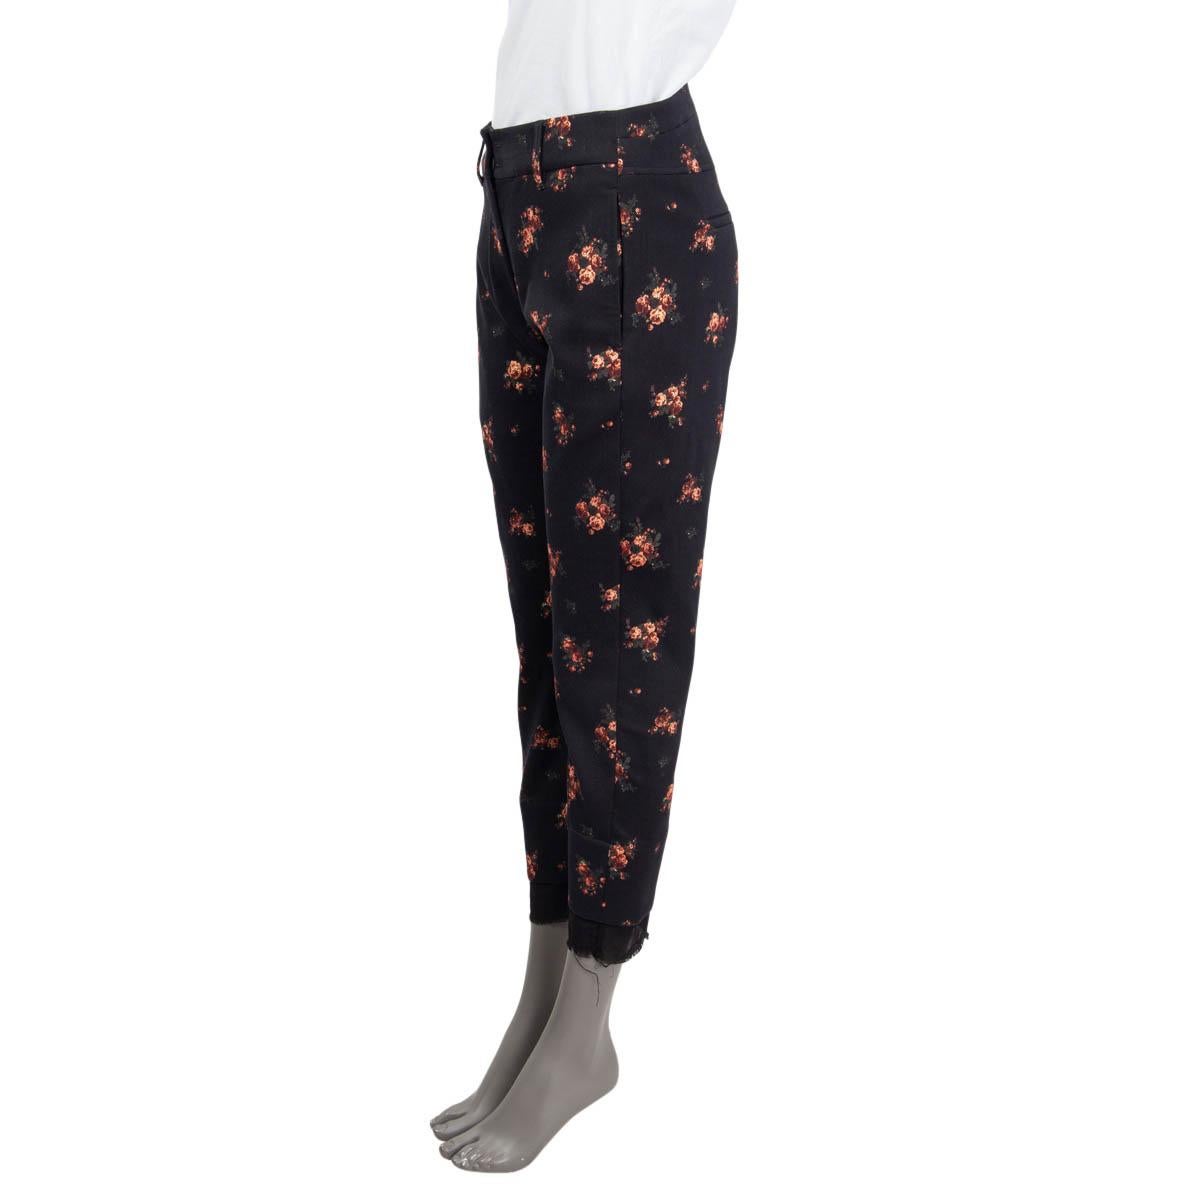 100% authentic Ann Demeulemeester 'Winona' pants in black cotton(54%), nylon (35%), spandex (6%) and polyester (5%). Feature a rose print, belt loops and the hem features a sheer black lining. Have two slit pockets on the sides and two slit pockets